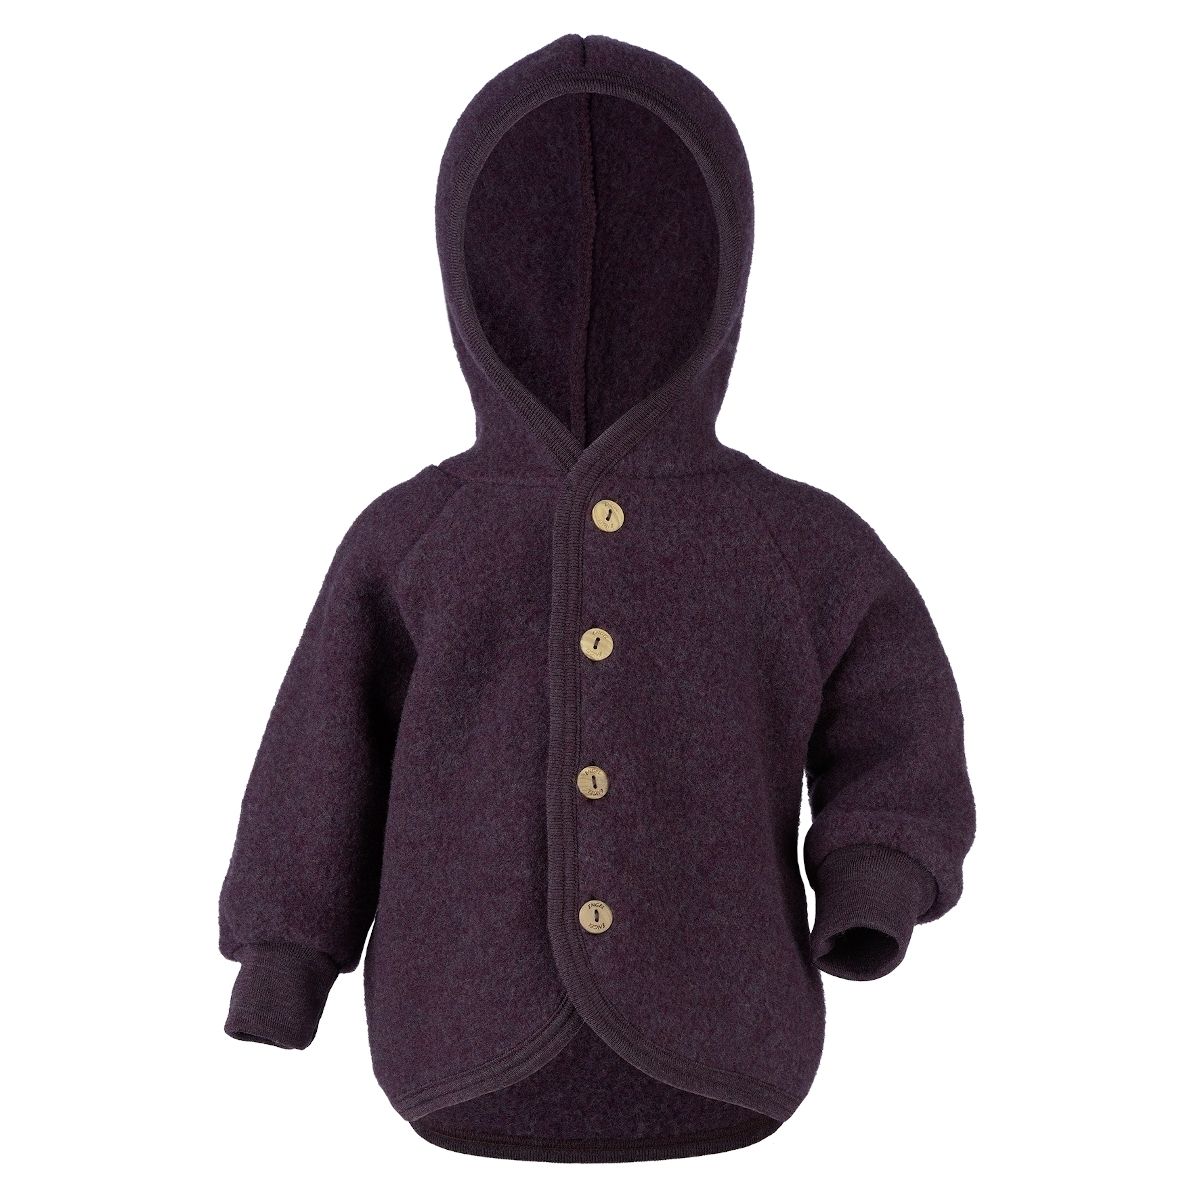 ENGEL Natur Hooded jacket with wooden buttons Purple melange 575520-059E 